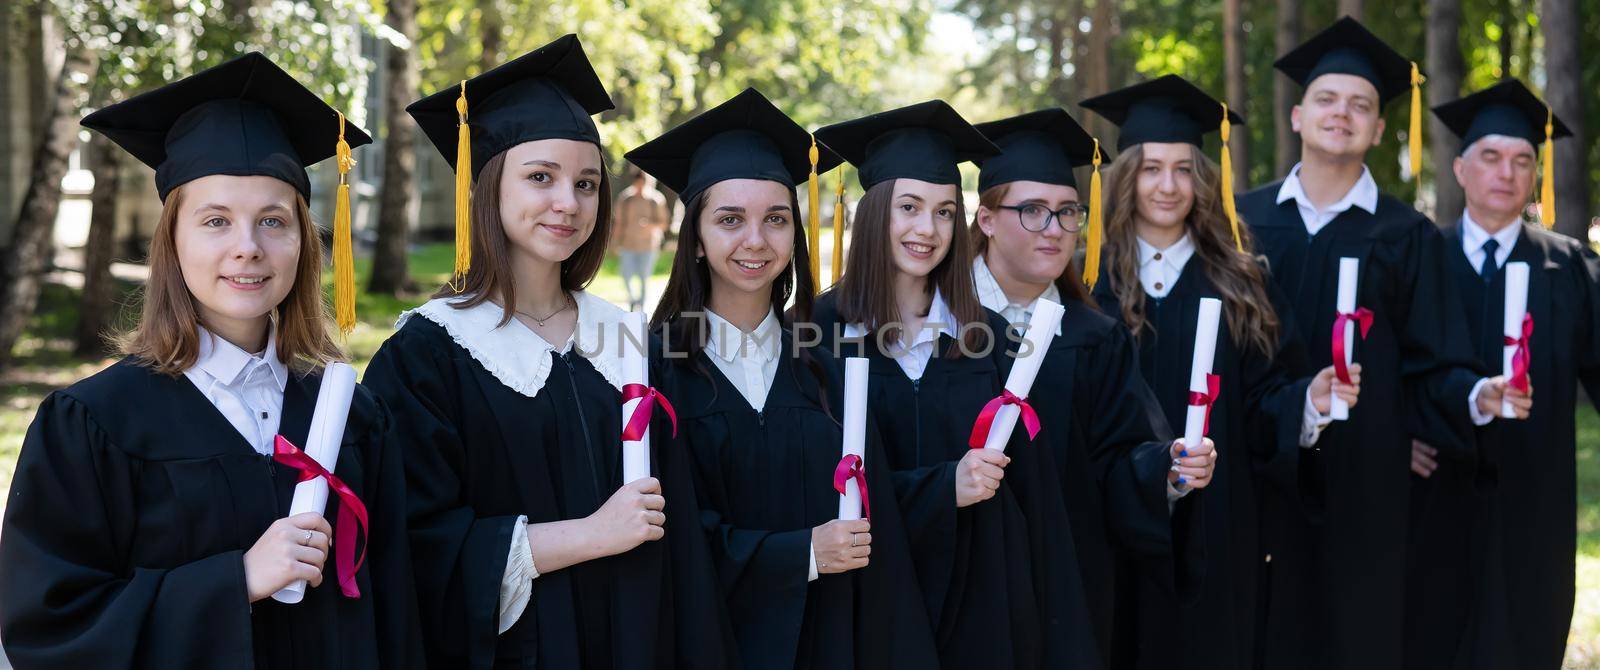 Row of young people in graduation gowns outdoors. Age student. Widescreen. by mrwed54